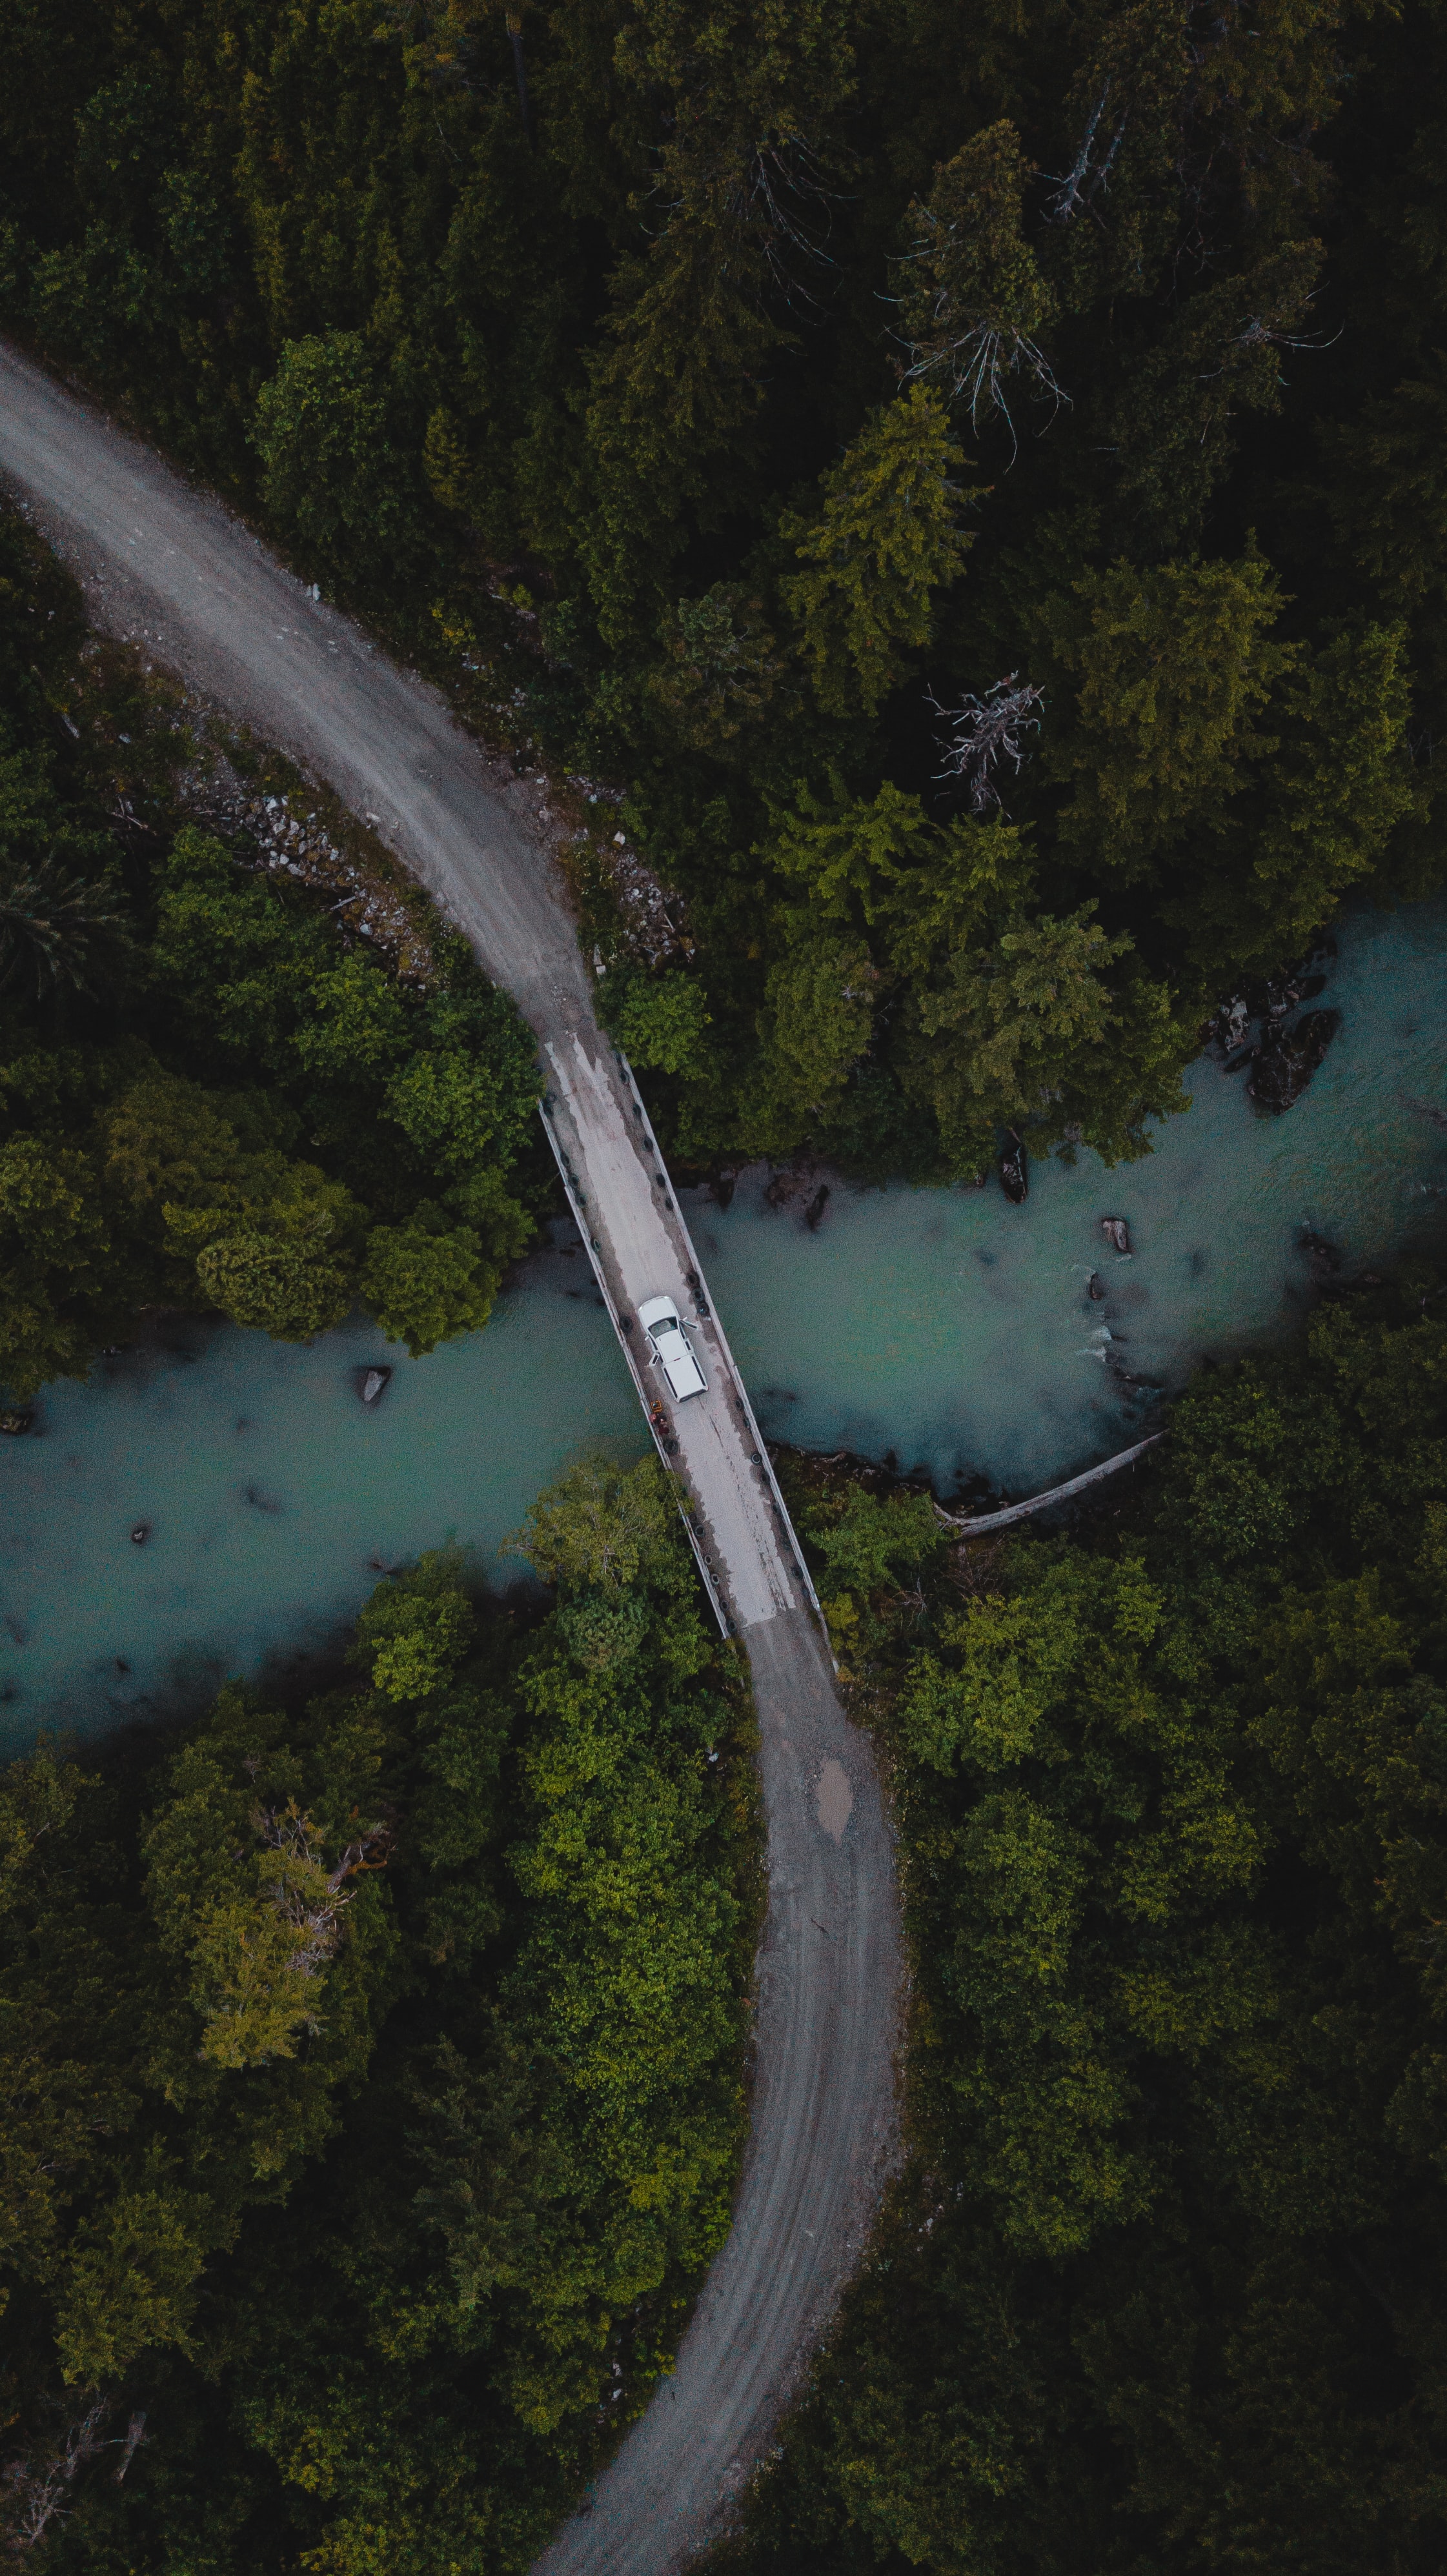 New Lock Screen Wallpapers rivers, nature, trees, view from above, forest, car, machine, bridge